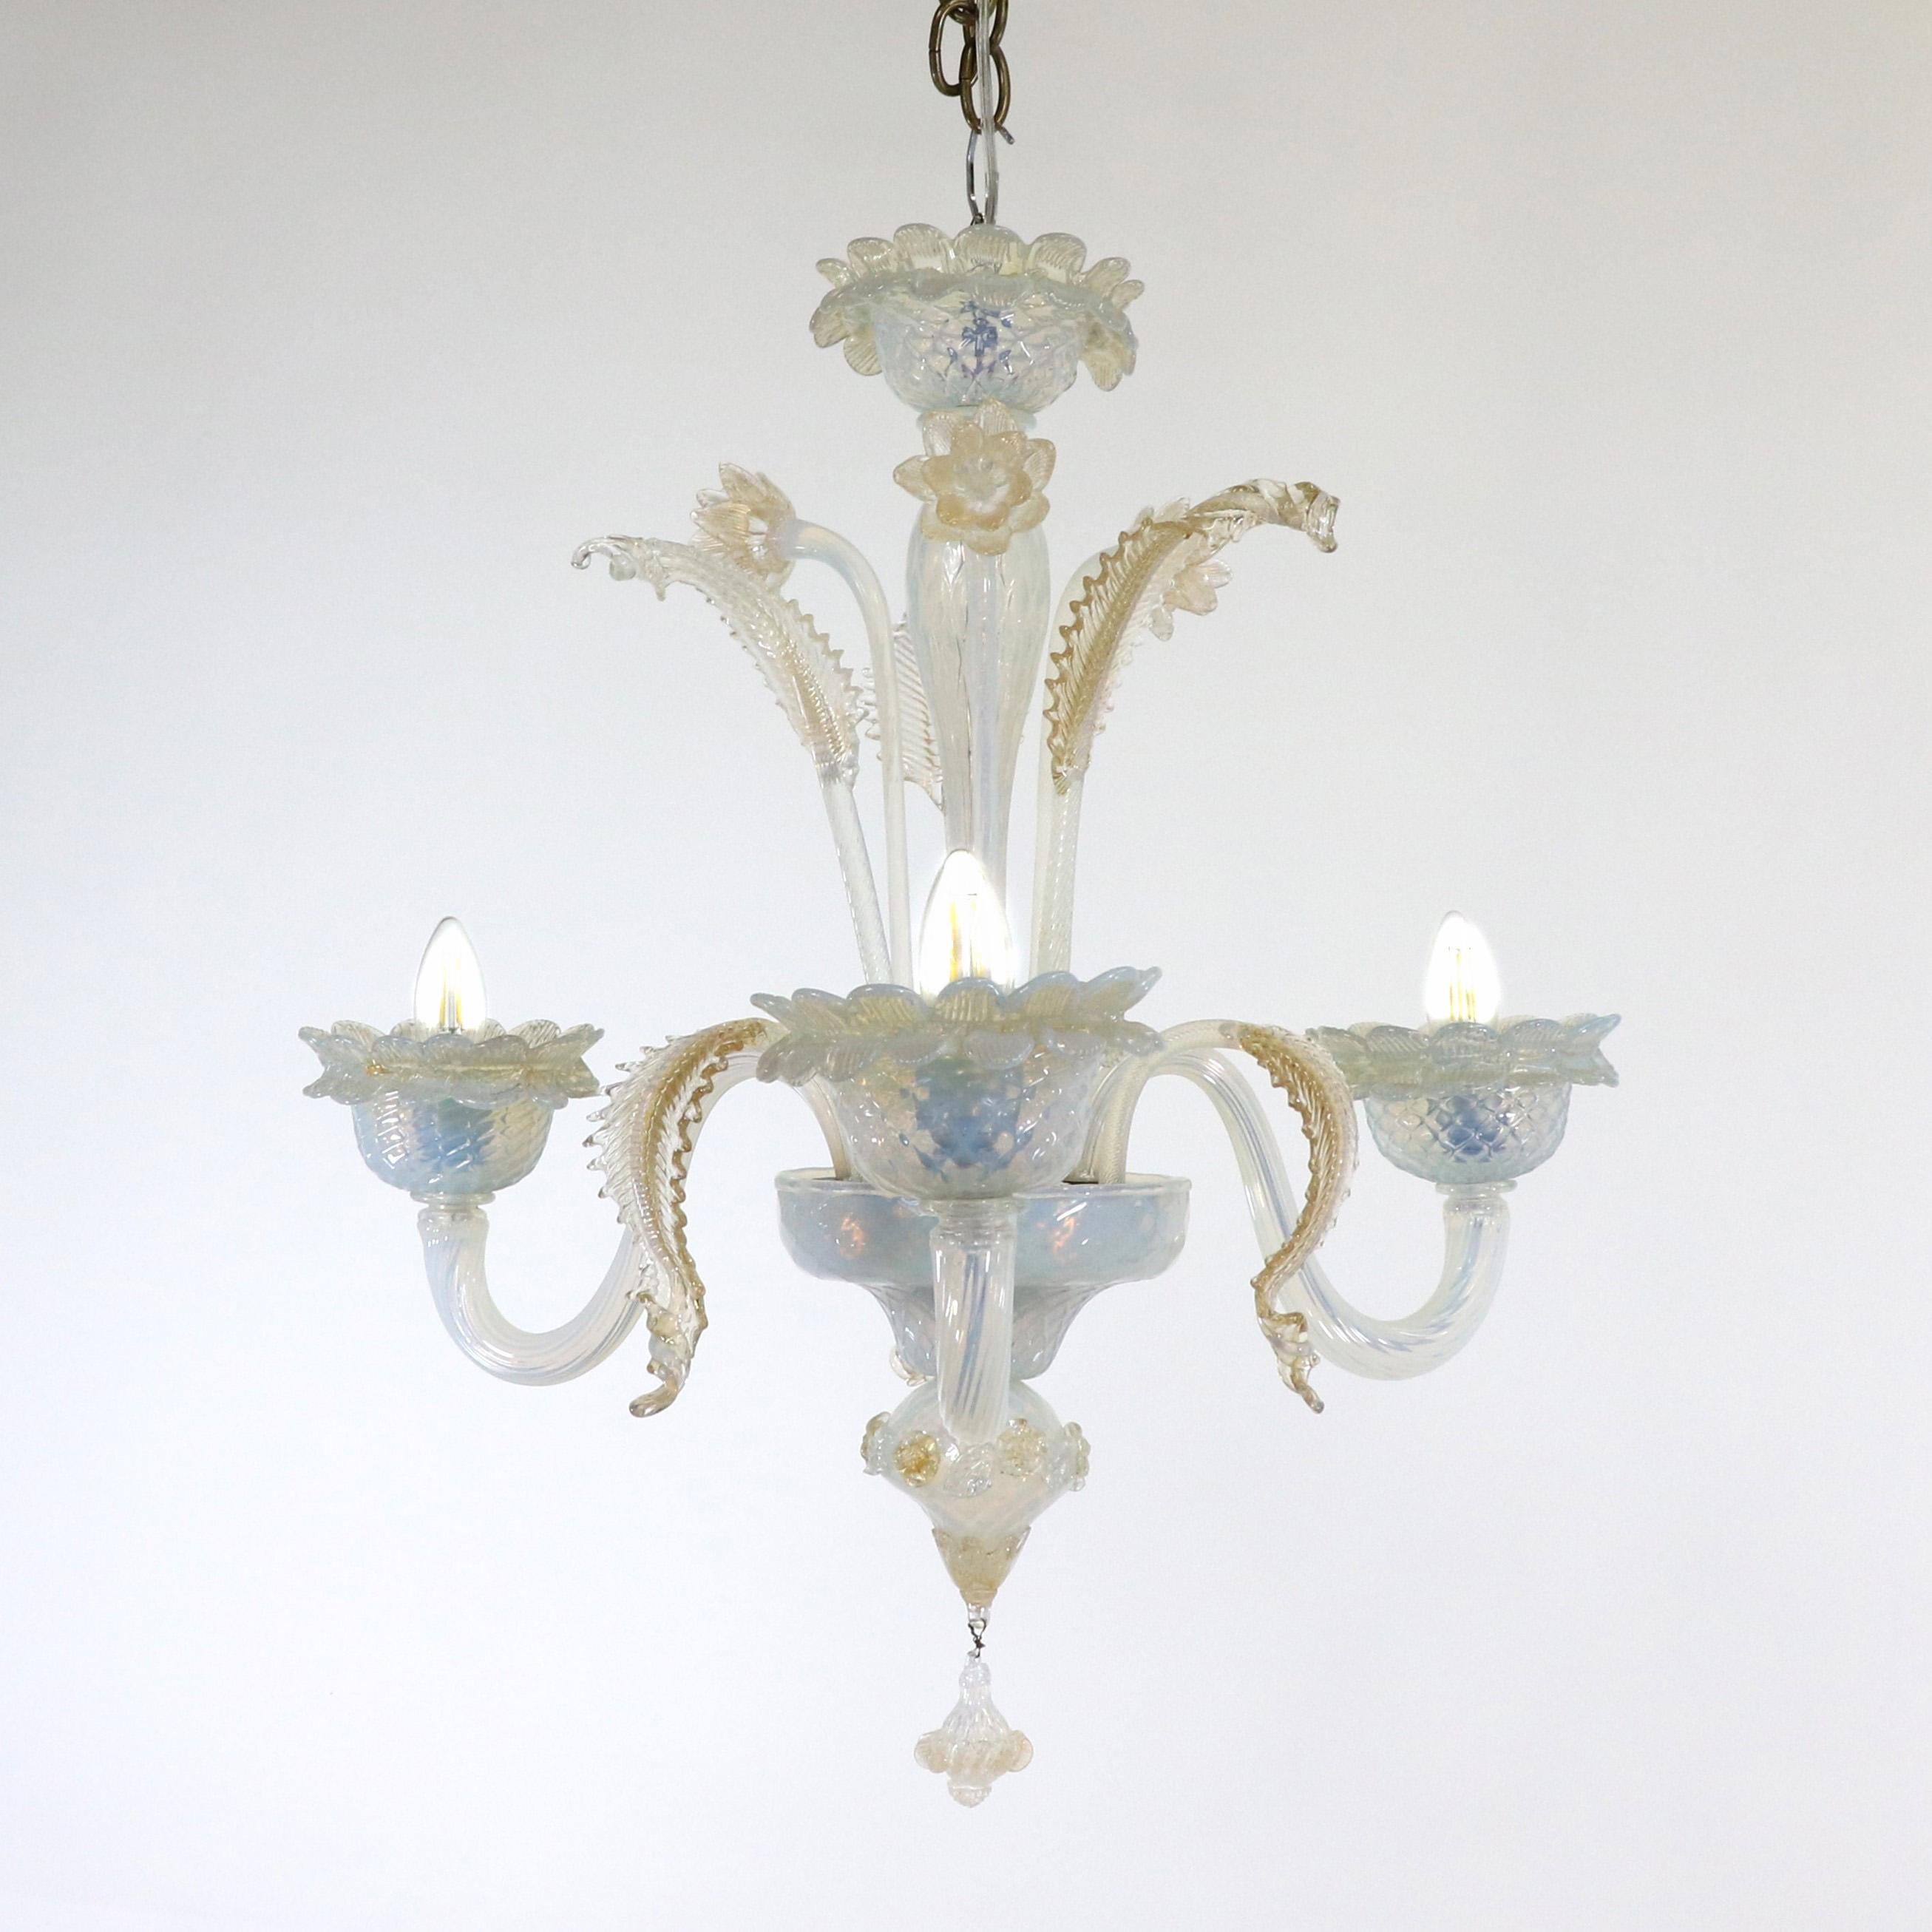 This exquisitely handcrafted gold-infused opaline Murano chandelier has three flexing arms with petal trimmed cups. The milky opaline glass veers towards a light blue color with subtle changes in the light. Flowers and leaves embellish this glass